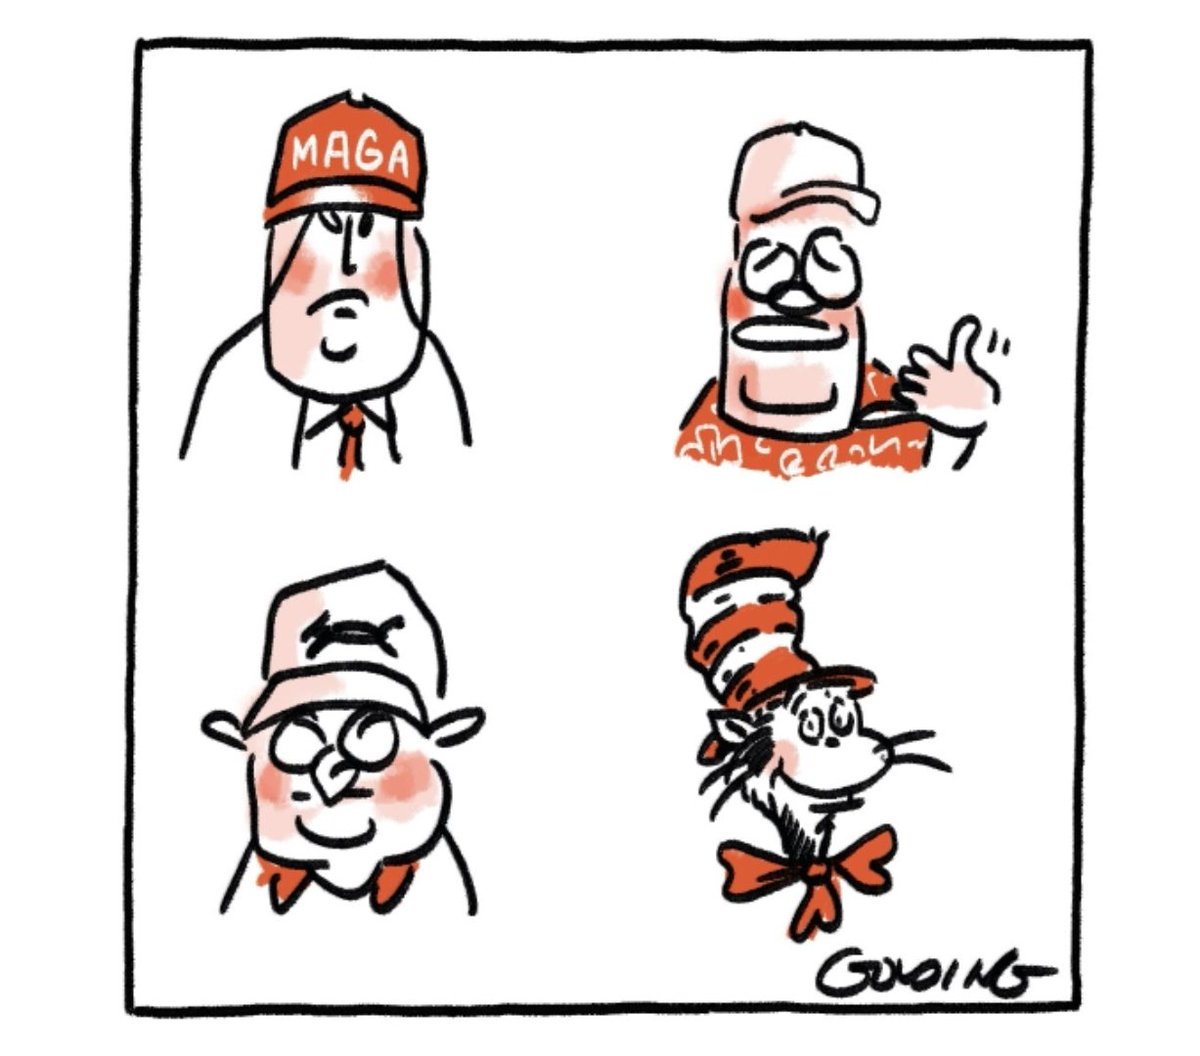 Memo to PM: stop wearing baseball caps because: a) stylistically they don’t do anything for you, and b) politically they have too much negative baggage associated with them a la Trump and Morrison. Allan Havelock, Surrey Hills @theage letters.